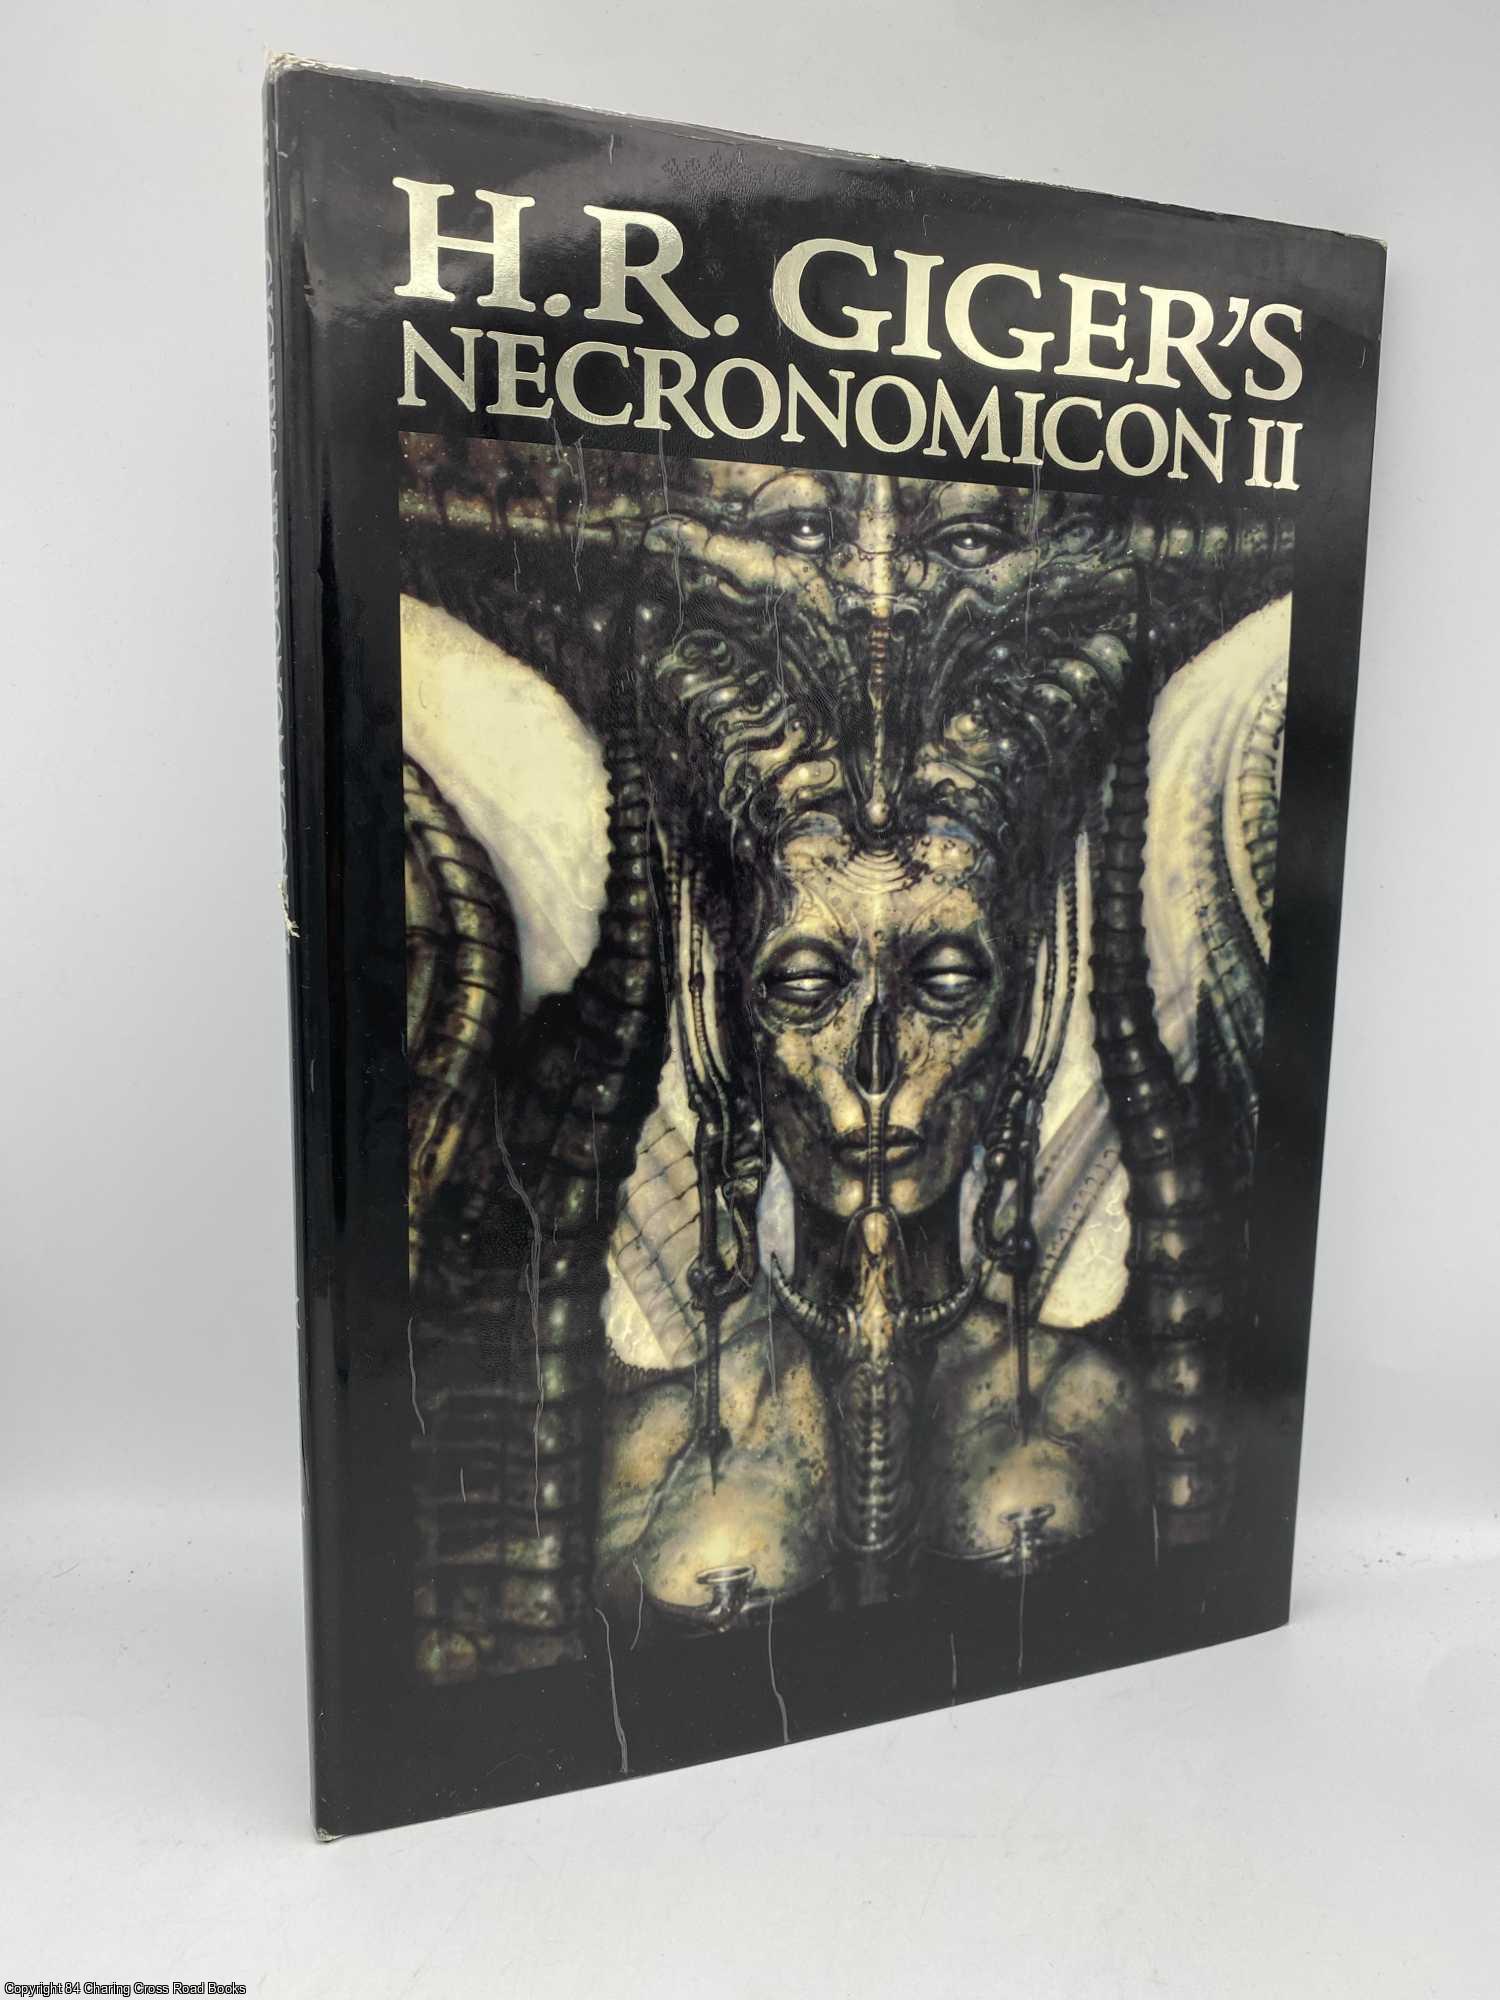 H. R. Giger's Necronomicon II by H. R. Giger, Harlan Ellison on 84 Charing  Cross Rare Books